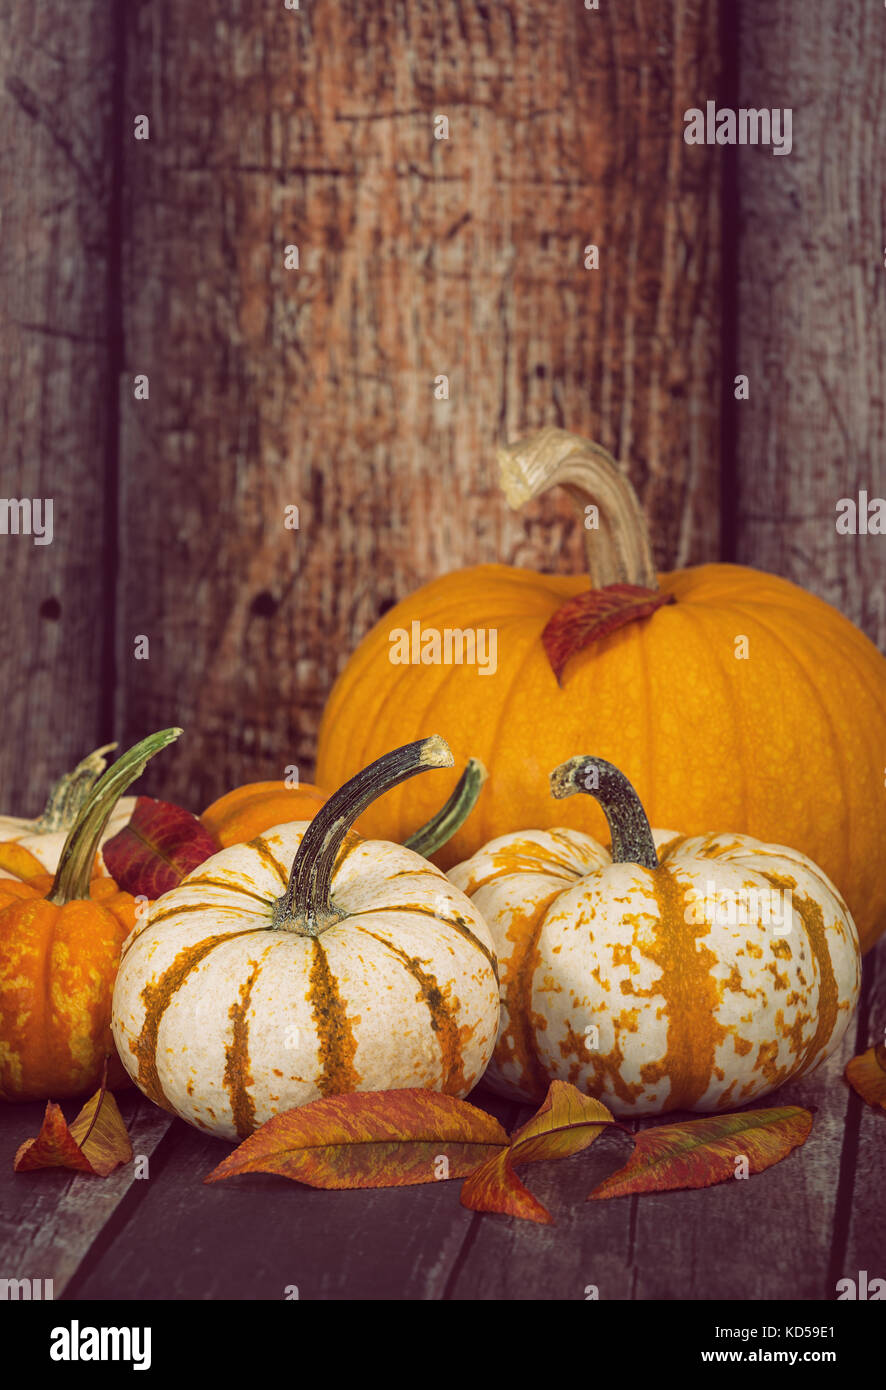 Mini pumpkins and a sugar pie pumpkin with autumn leaves against rustic wooden background, copy space Stock Photo